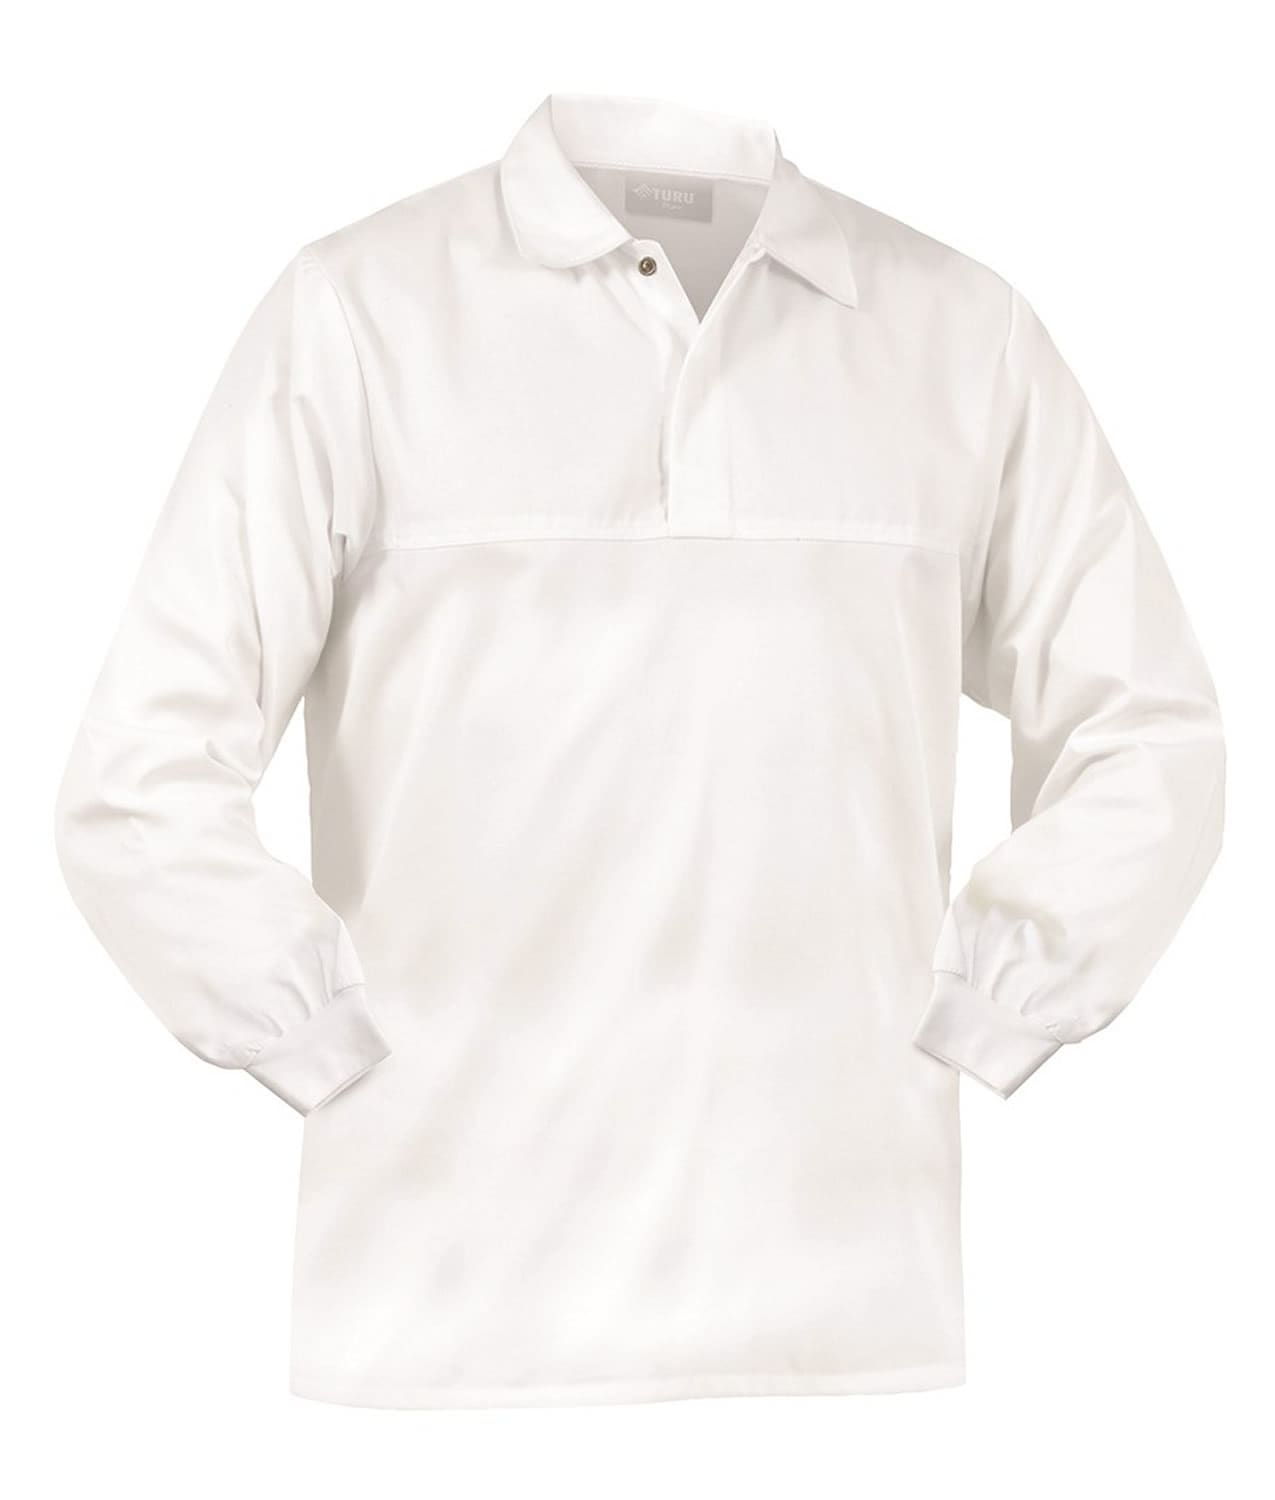 Food Industry 240gsm Polycotton Domed front Long sleeve Jerkin Smartzone